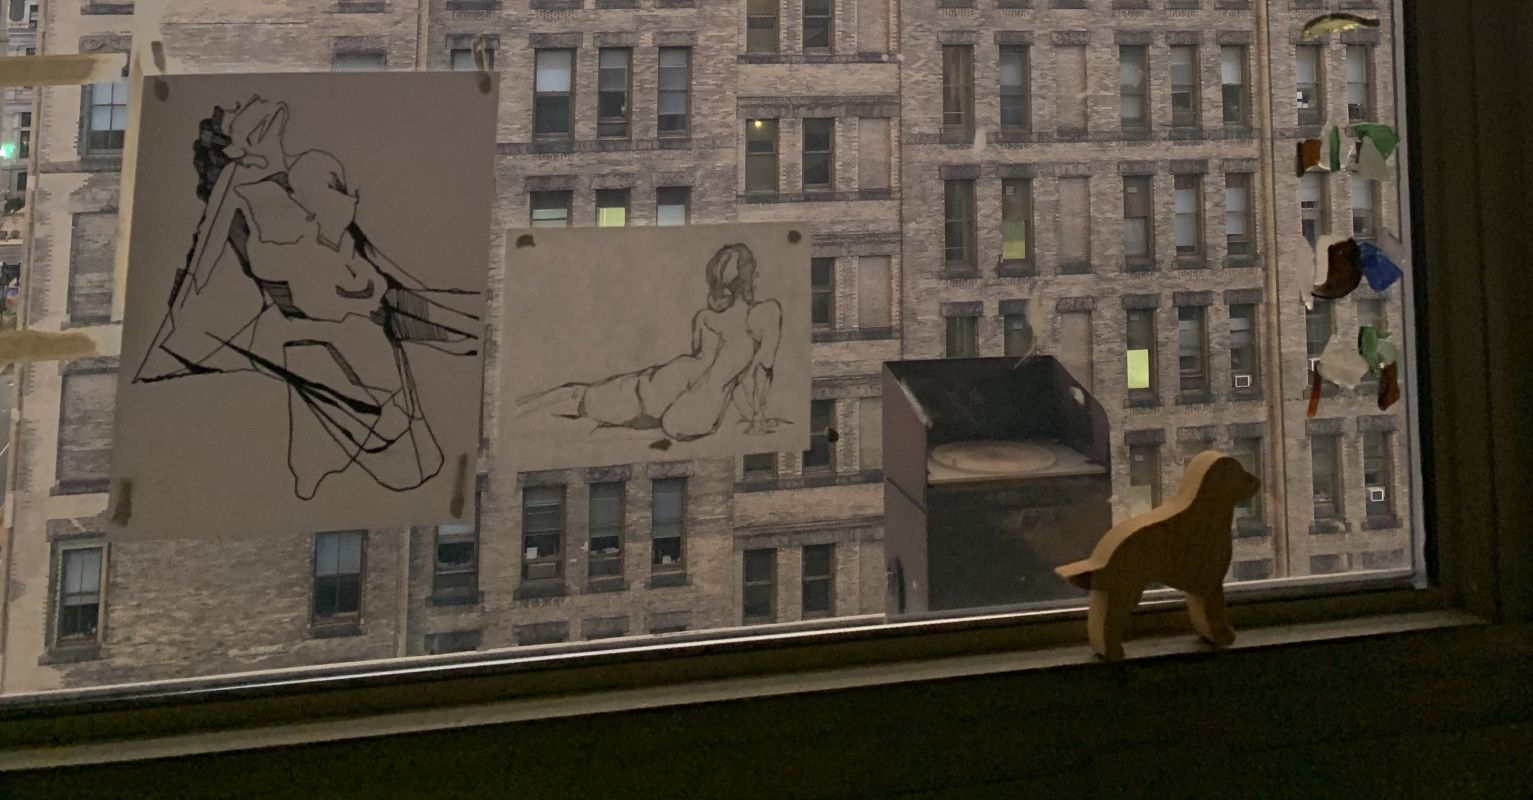 ink drawings of nude figures taped to window with large building in the background